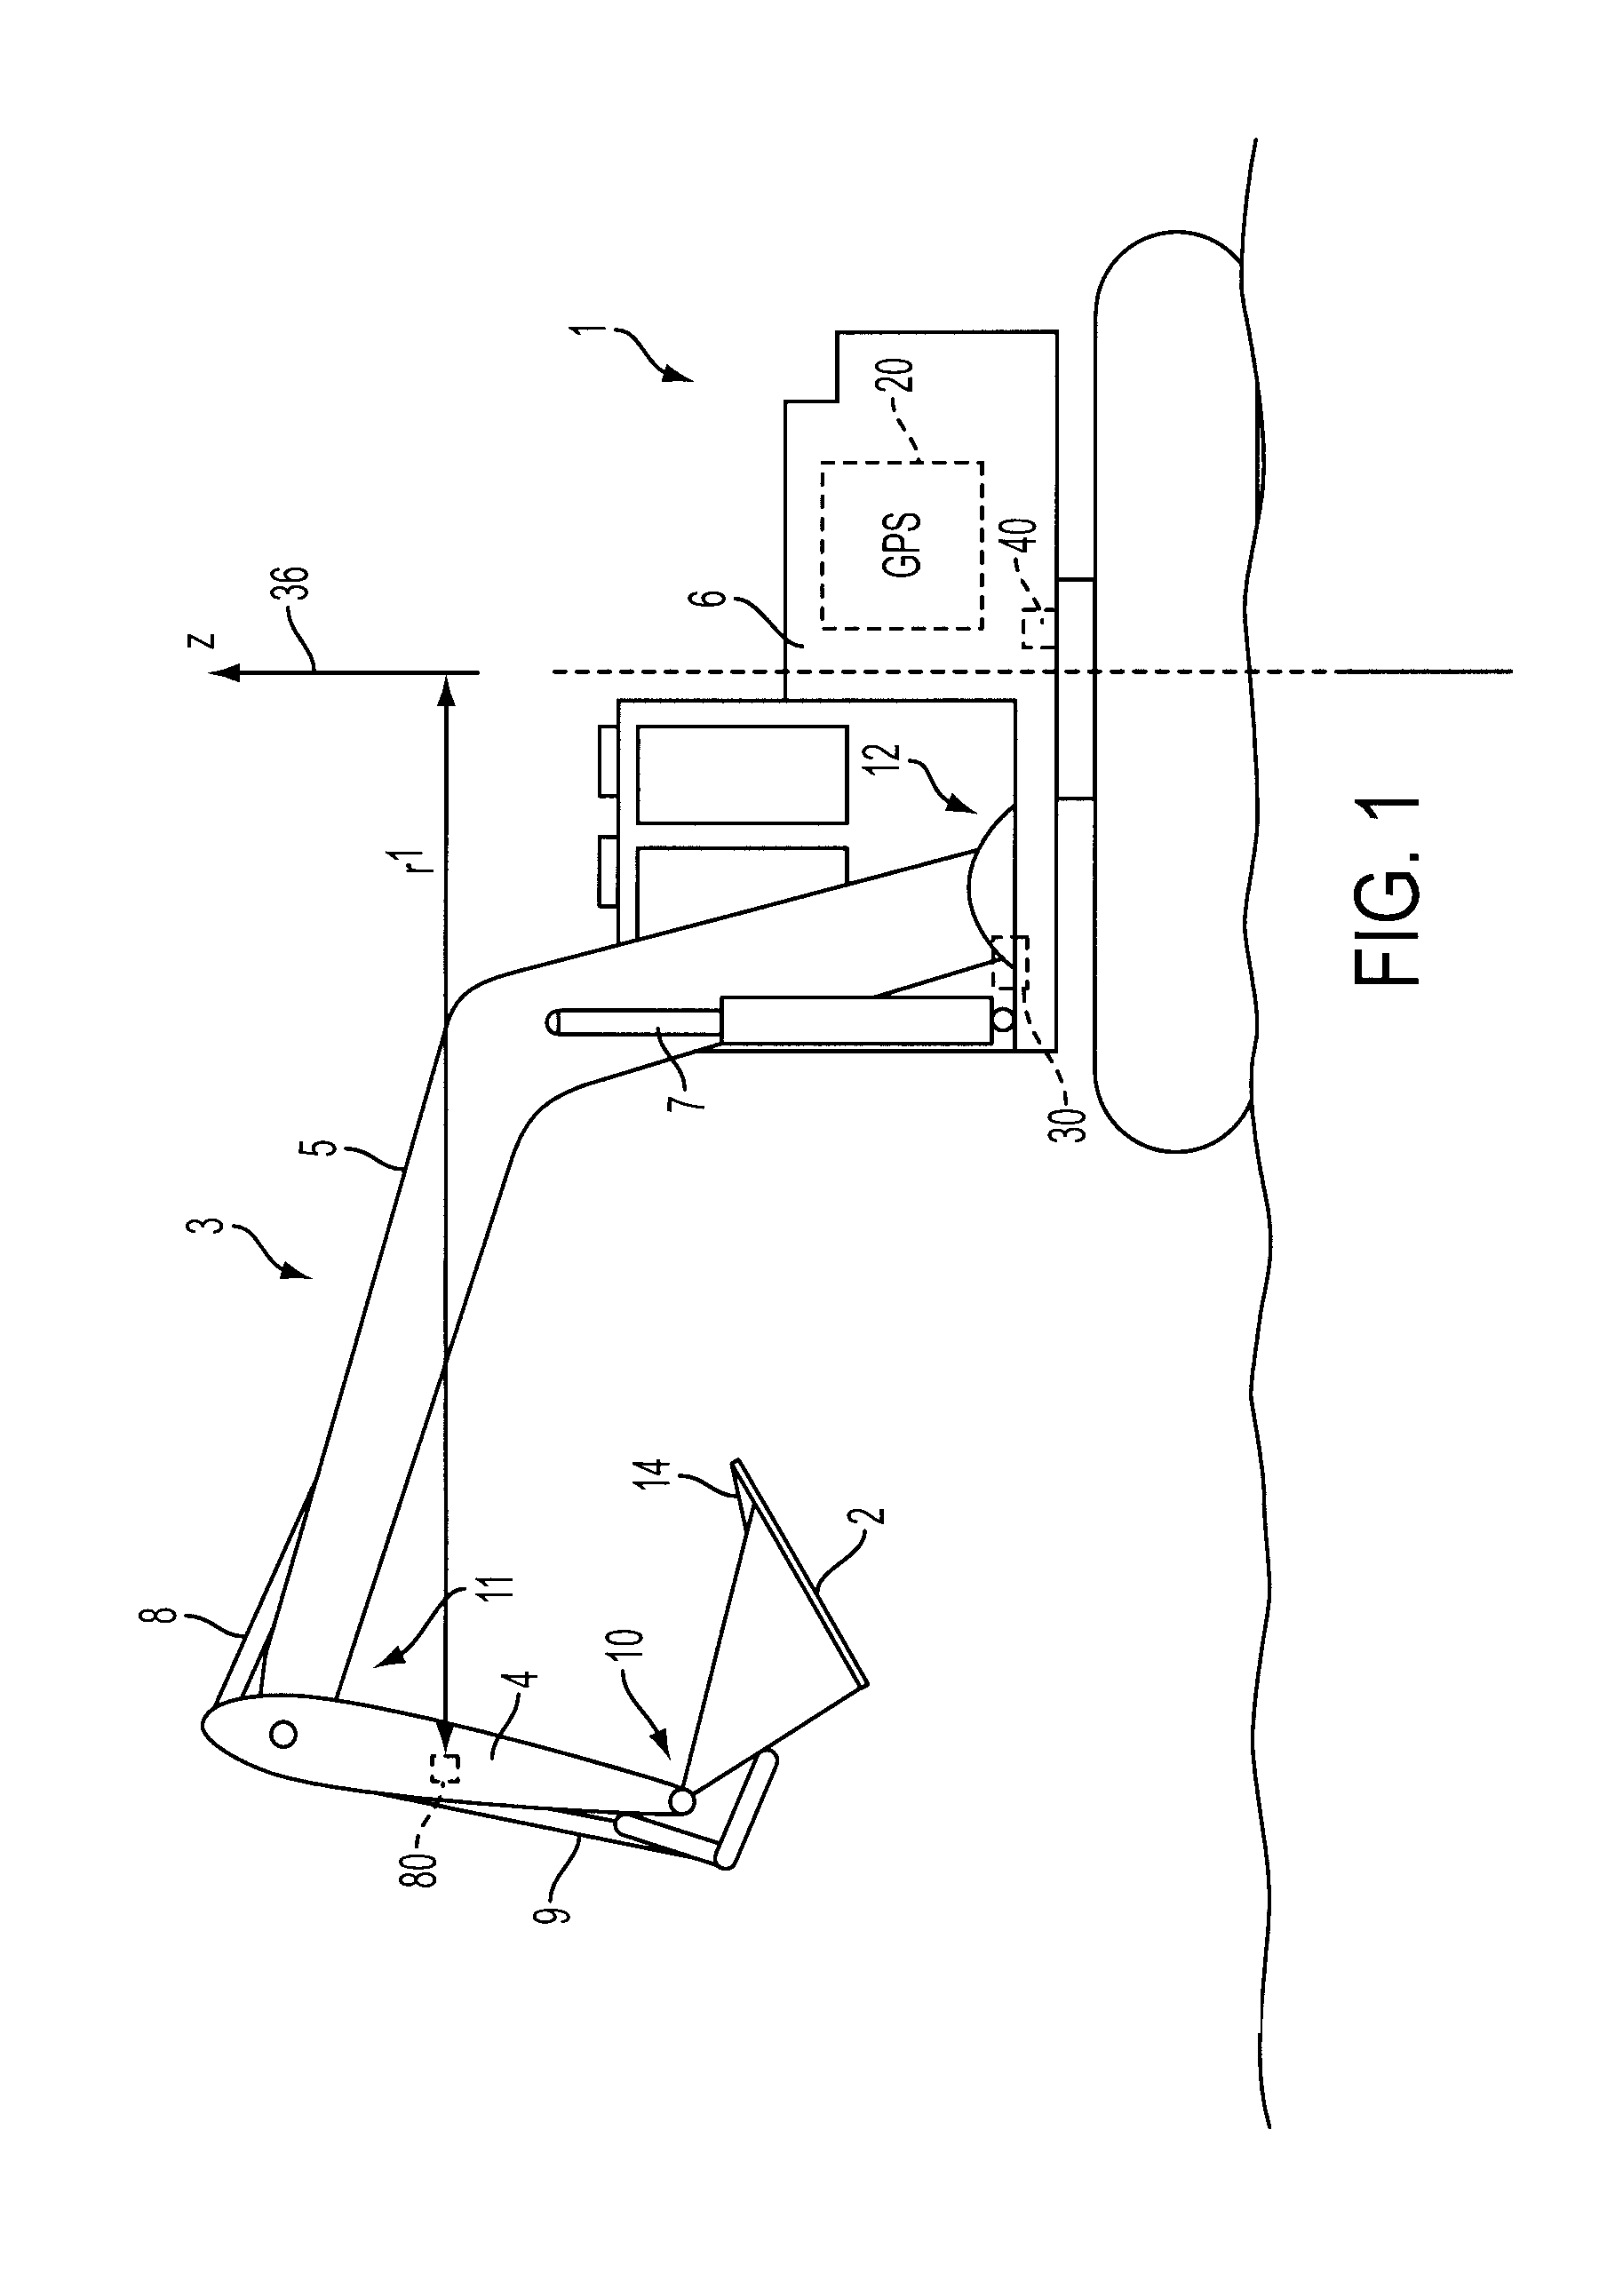 Inclinometer measurement system and method providing correction for movement induced acceleration errors